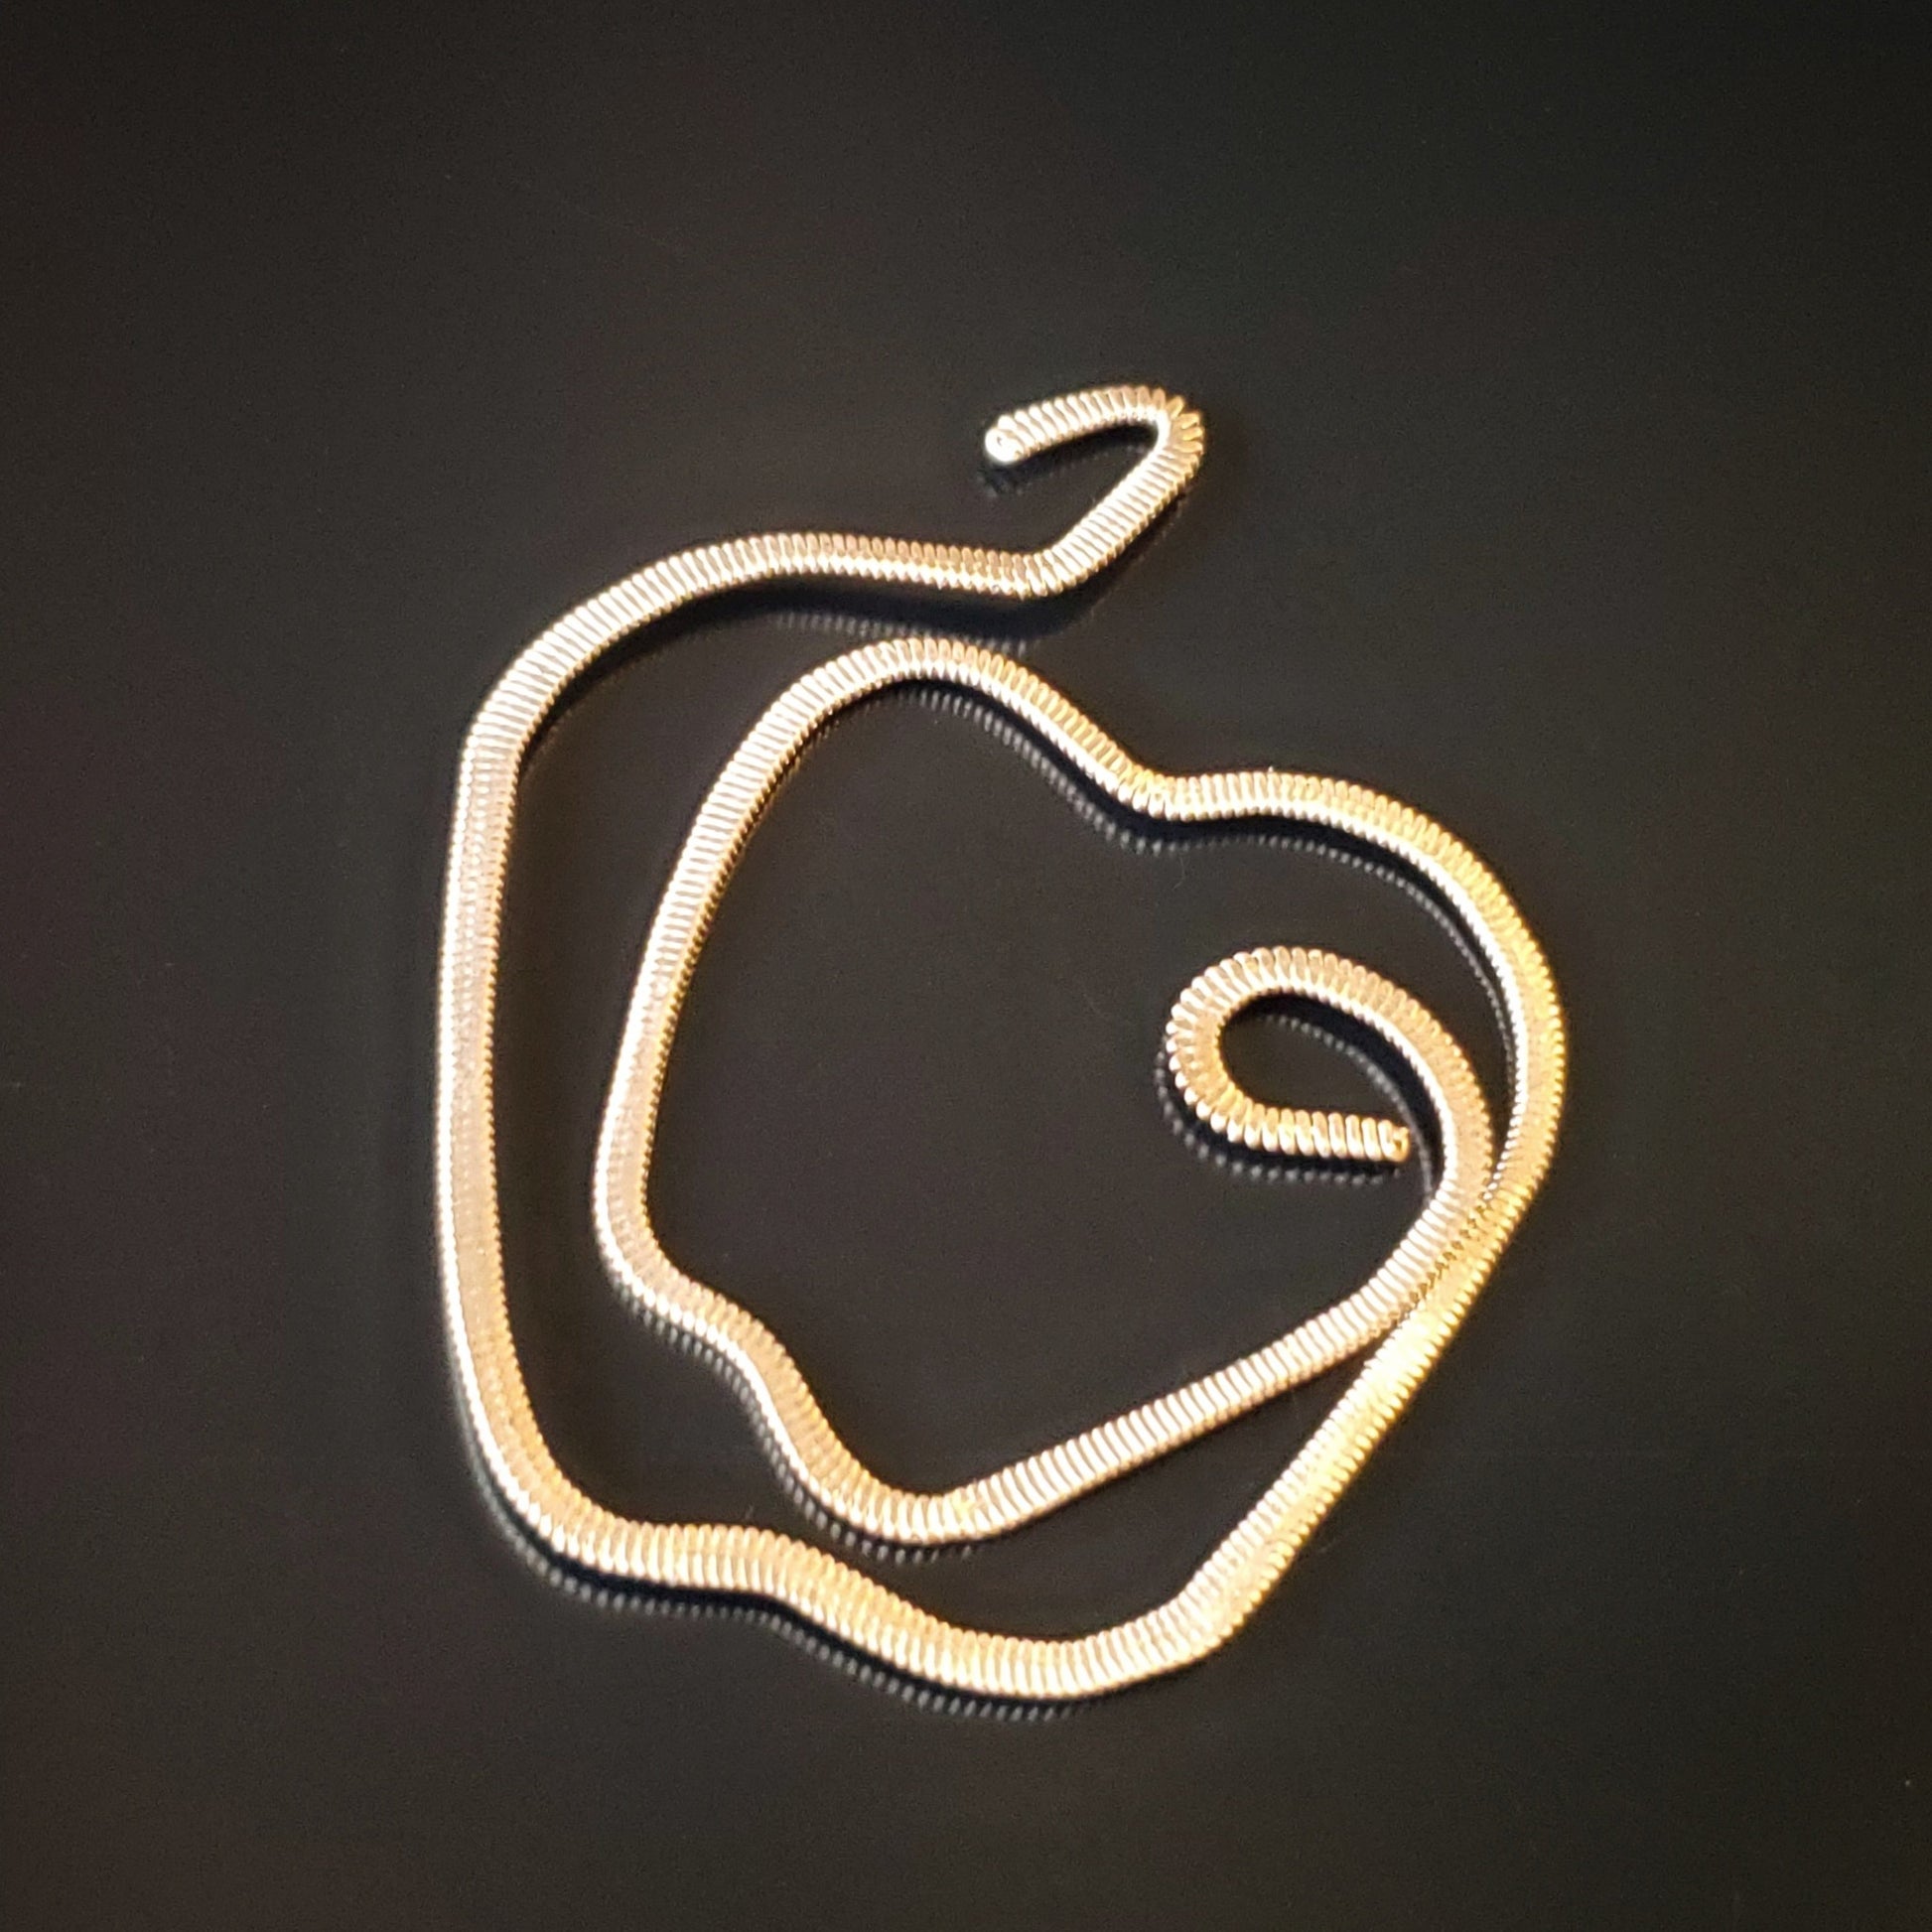 gold guitar string bookmark shaped like an apple on a black background